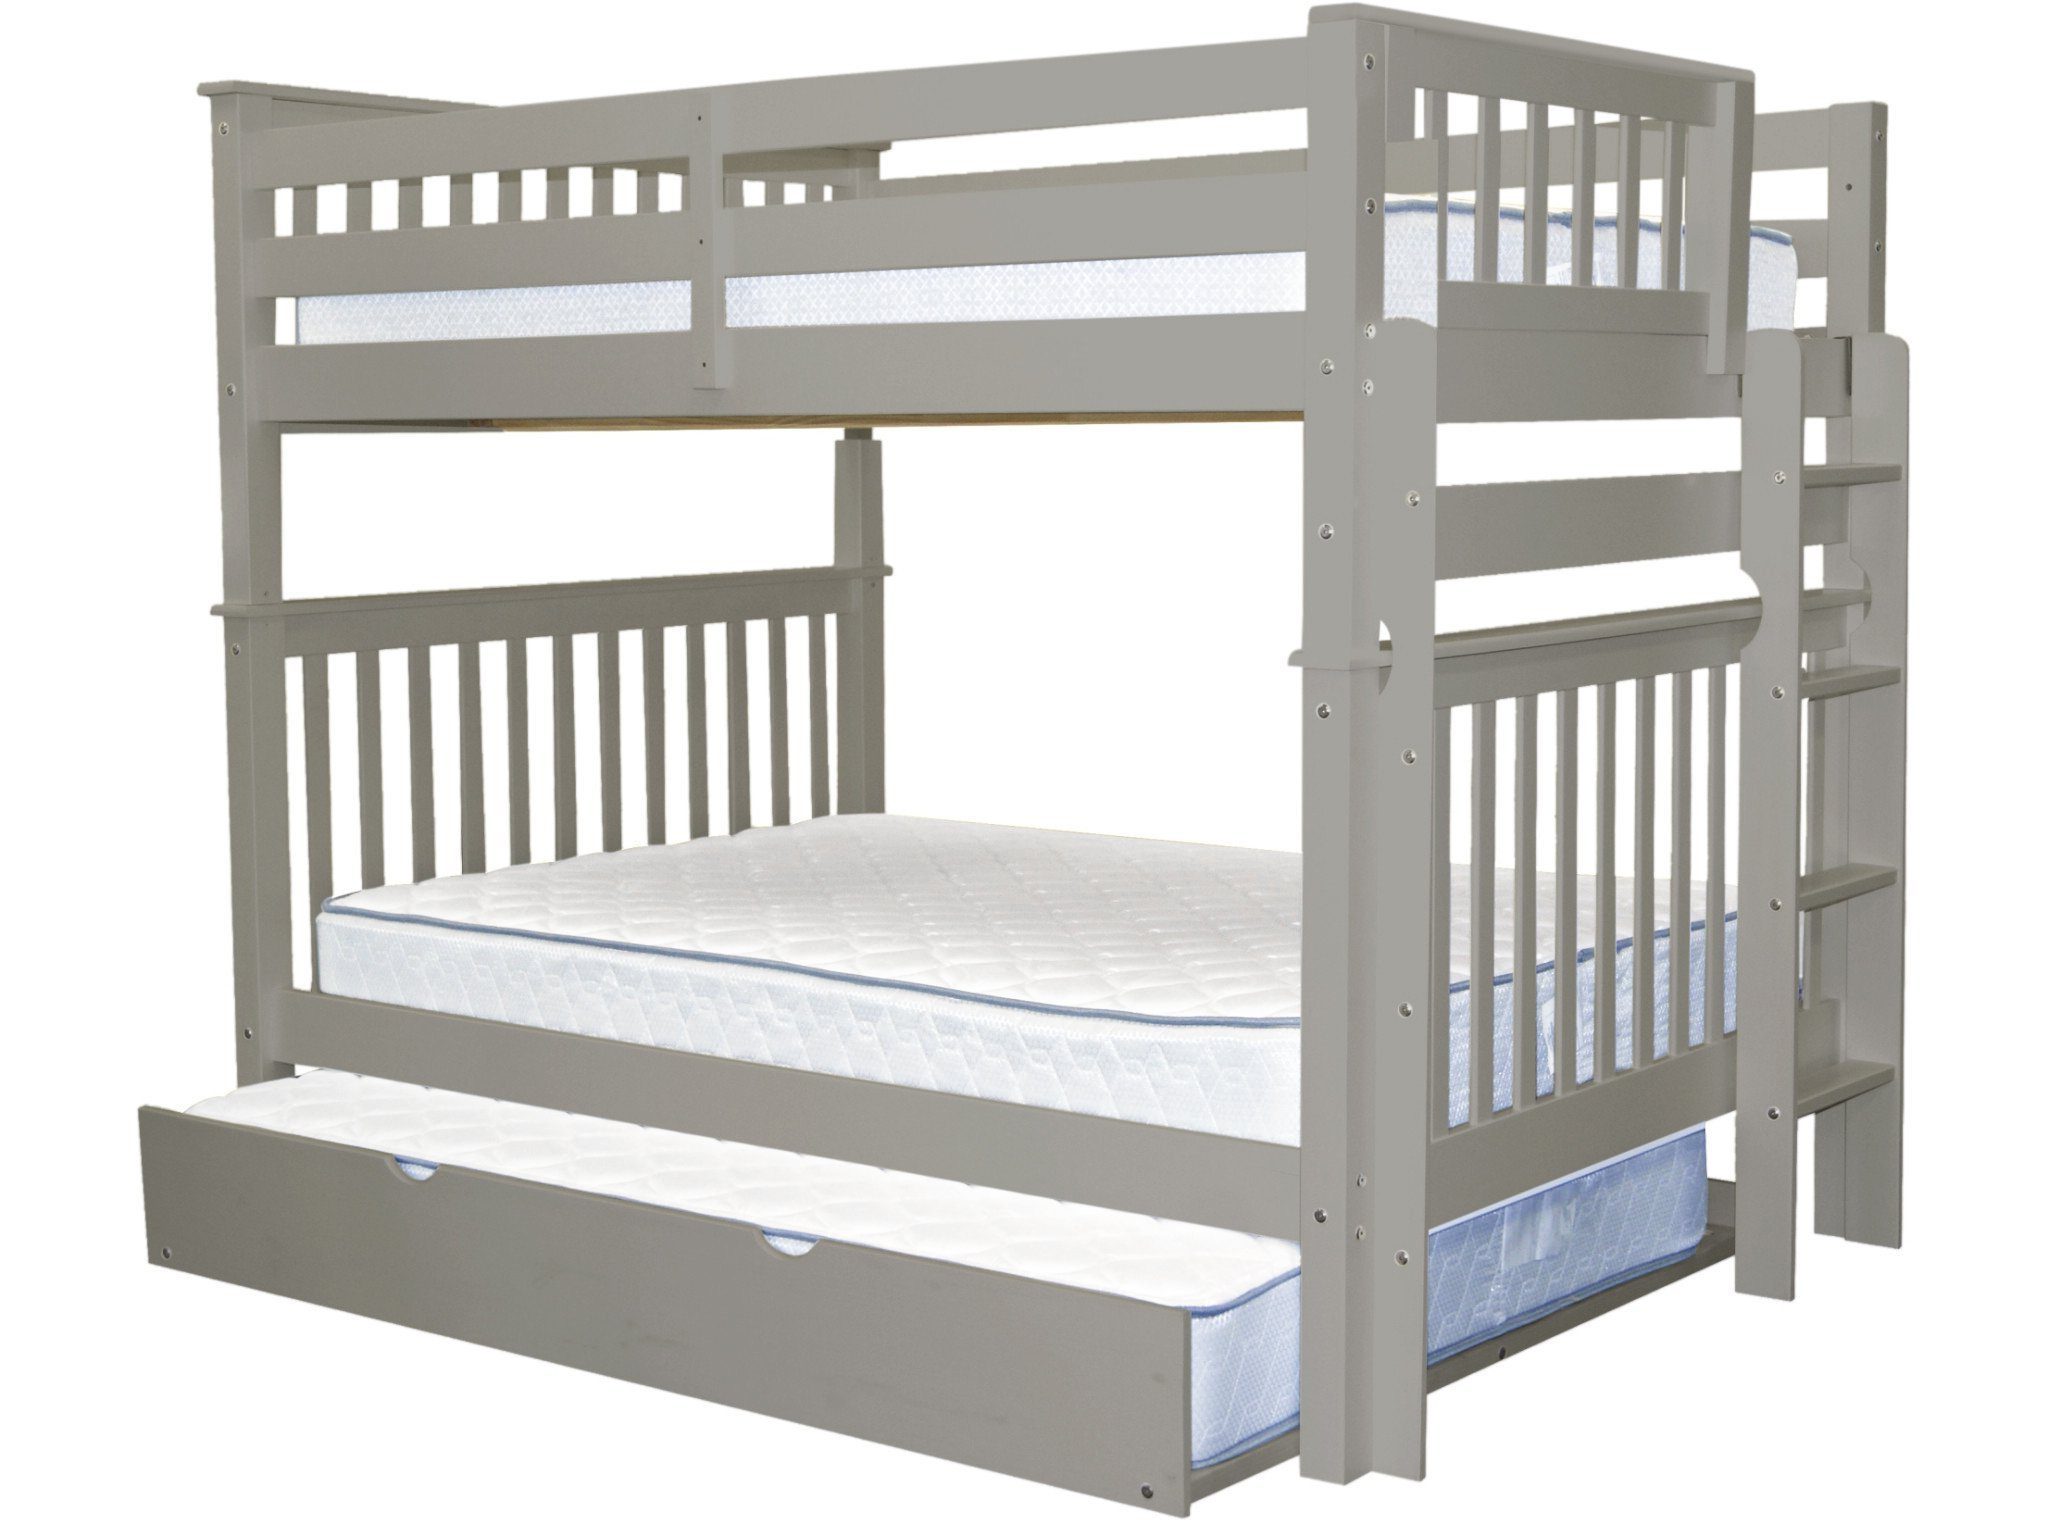 Bunk Bed King Mission Style, Bedz King Full Over Full Bunk Bed With Trundle